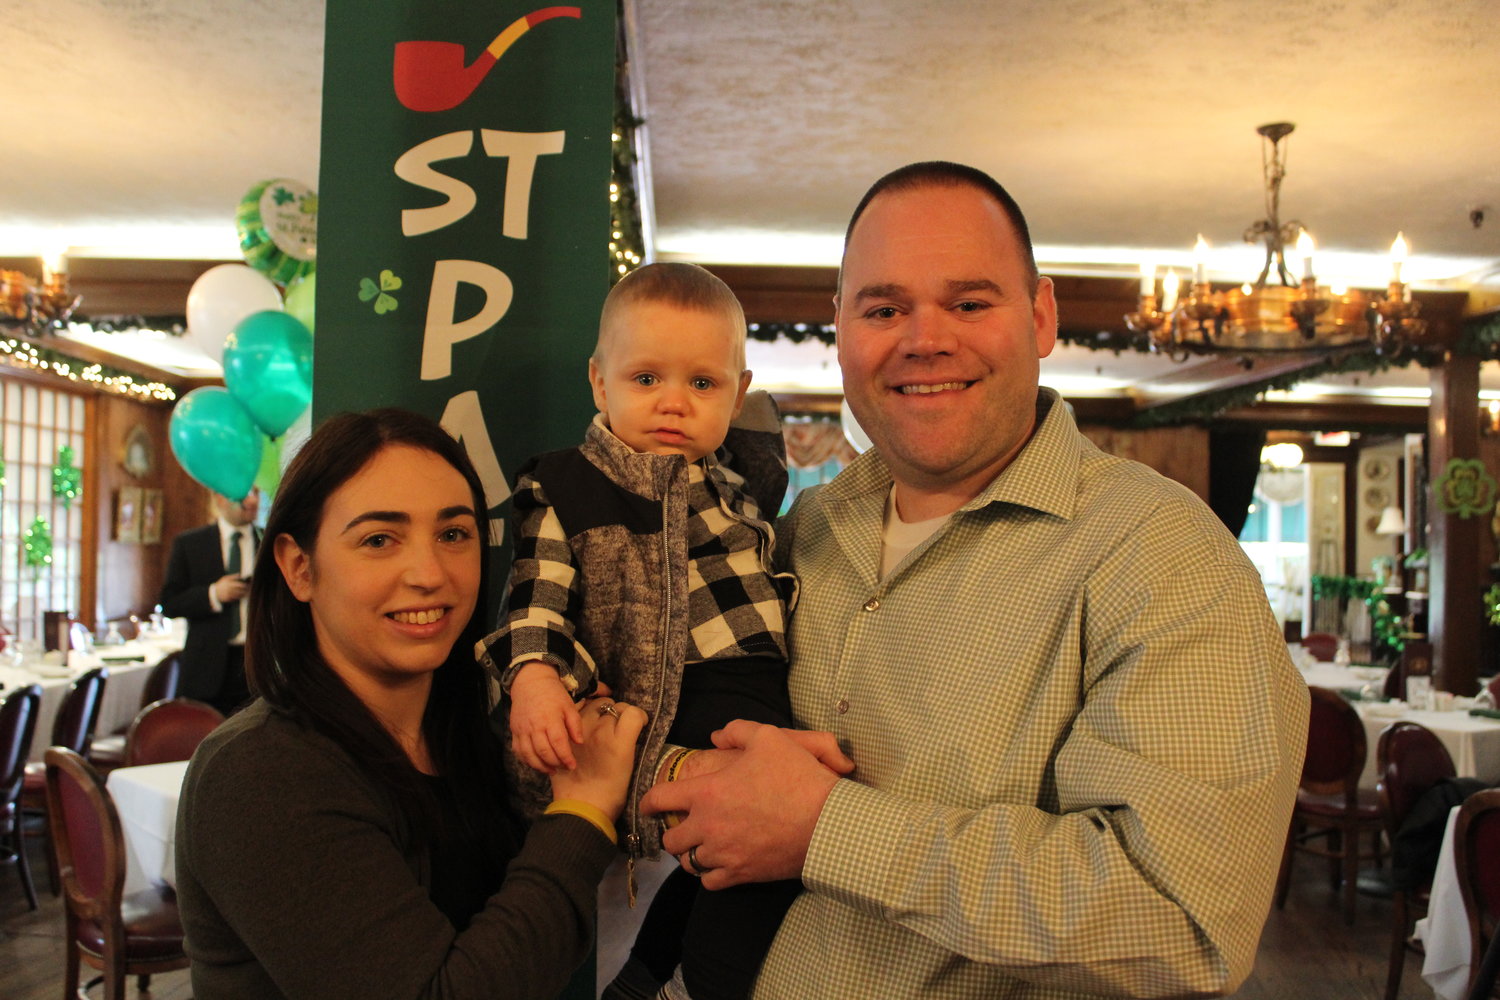 The Graham family – Rachel, Cooper and Michael, attended the cook-out on March 16 at the Milleridge Inn.